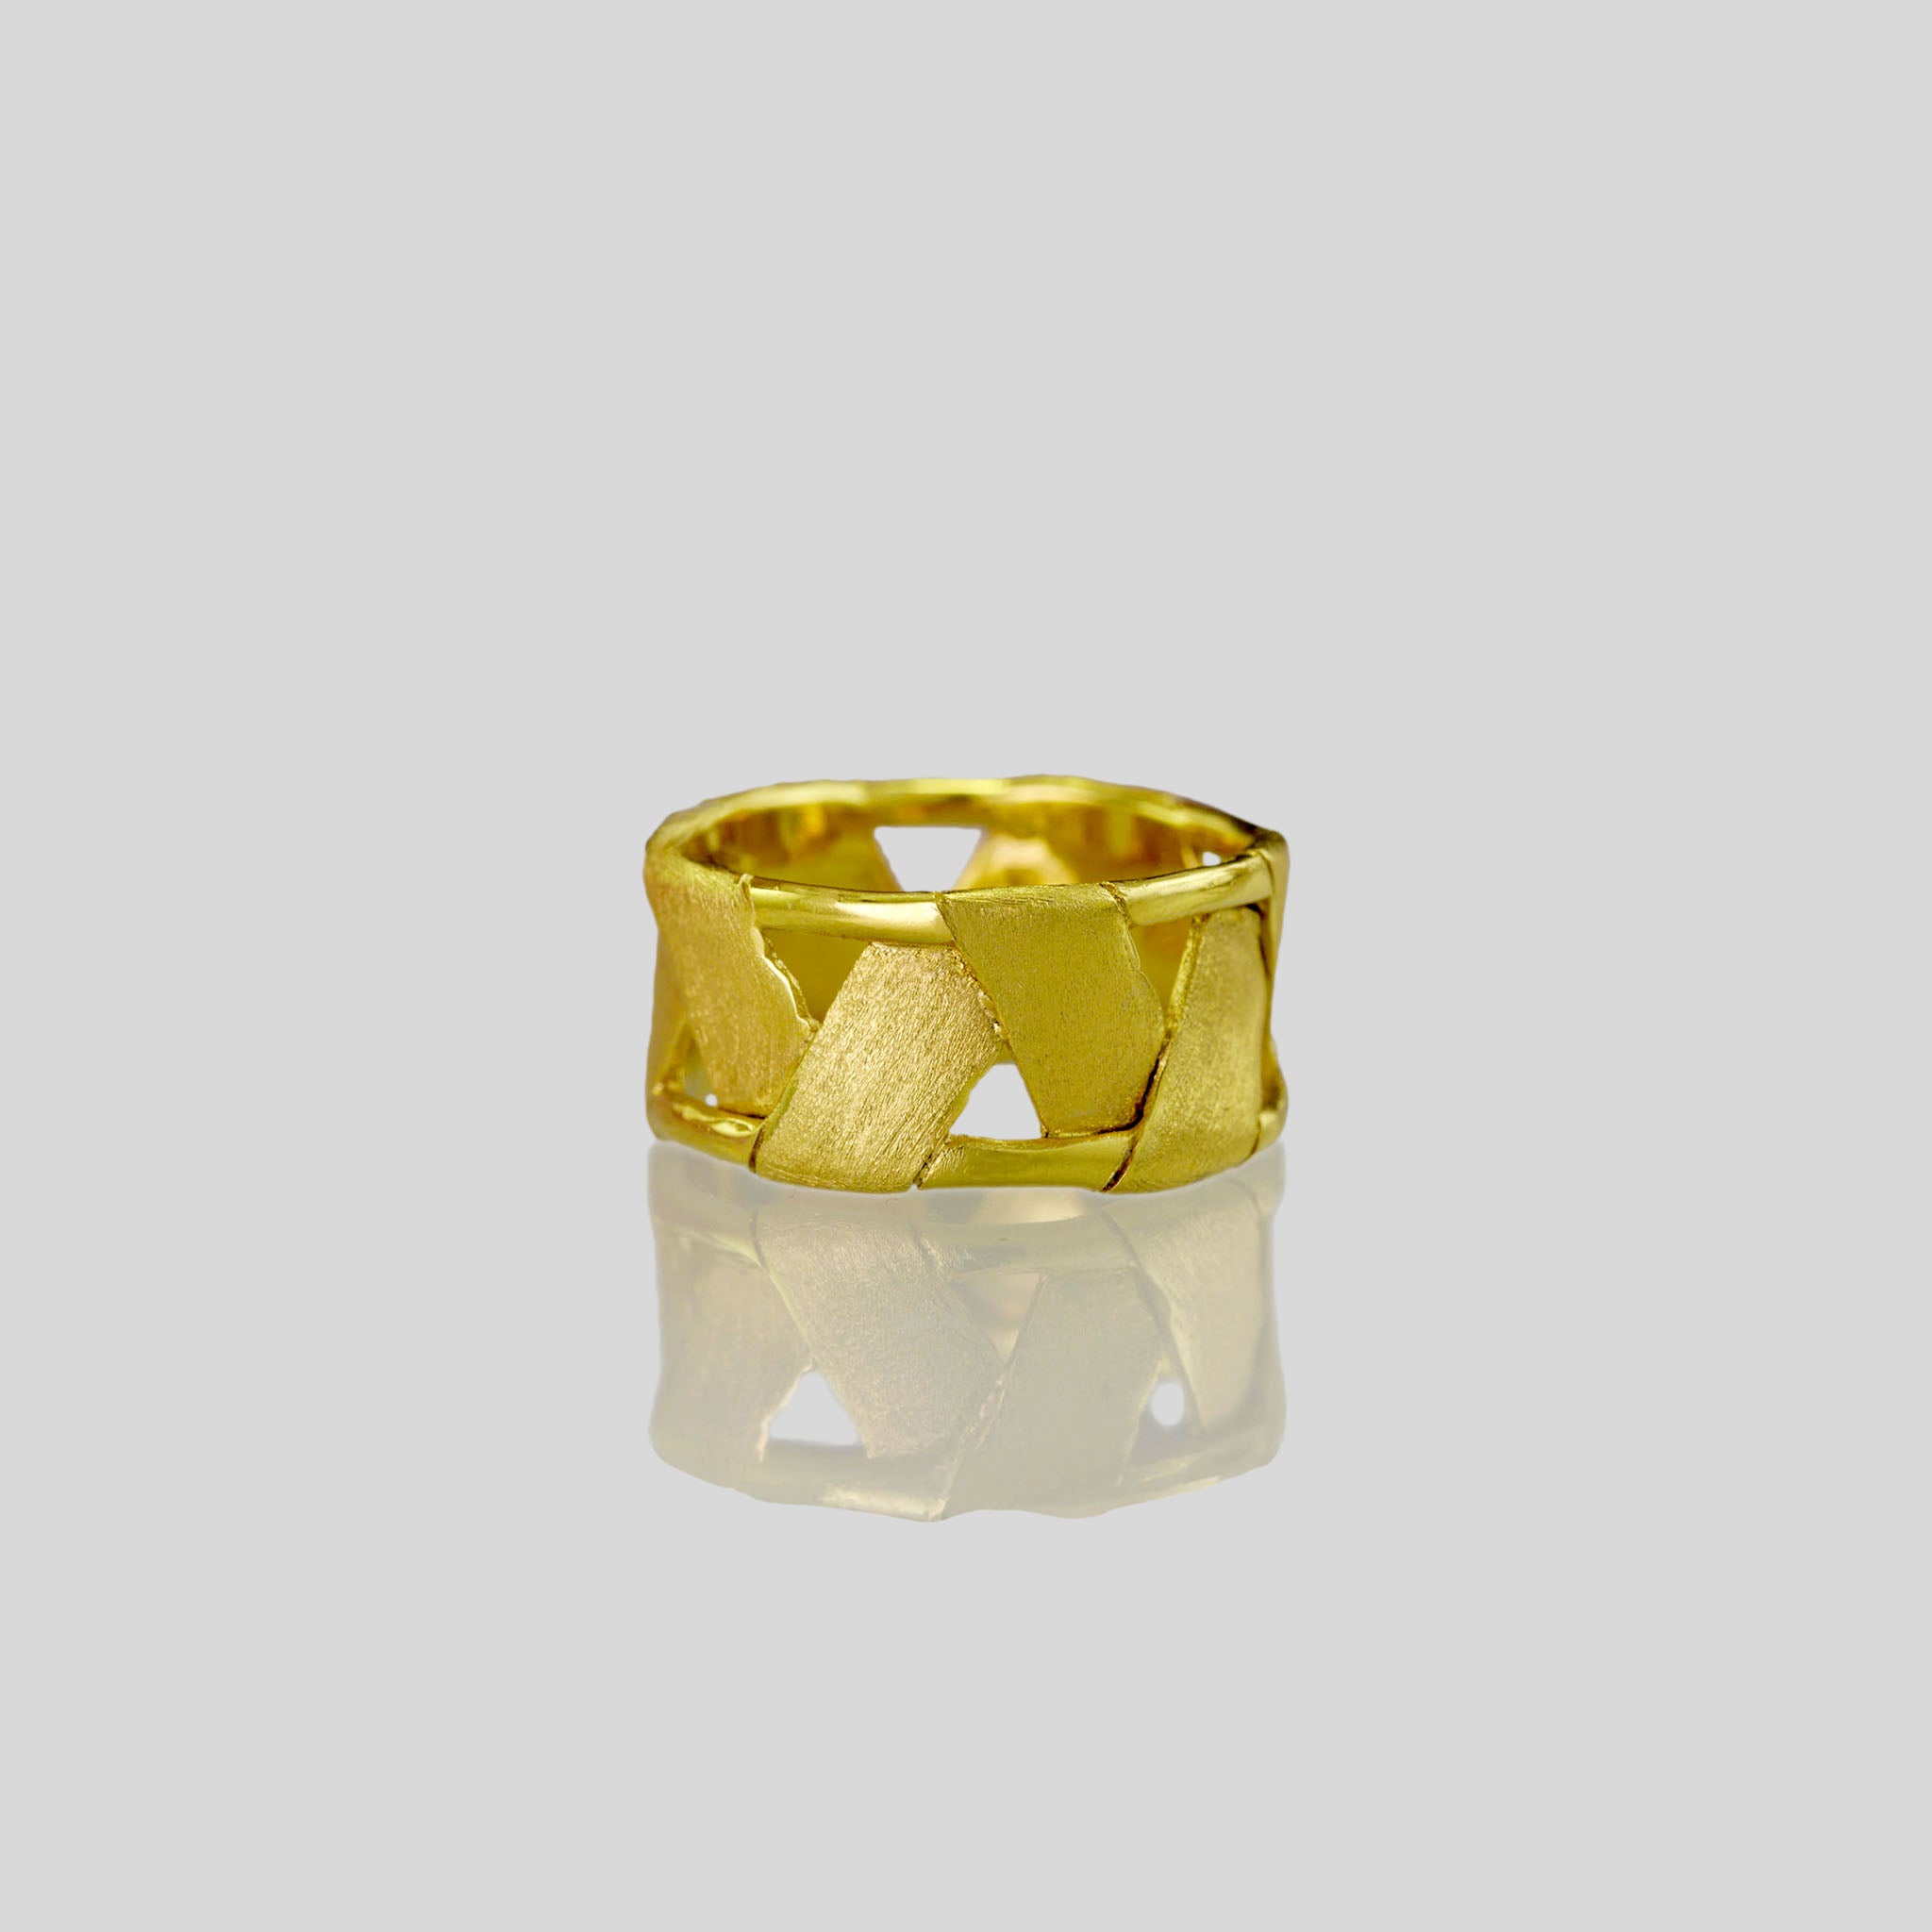 Unique 18k Yellow Gold Braided Ring fashioned in the shape of a drum, offering both boldness and comfort with its lightweight design.